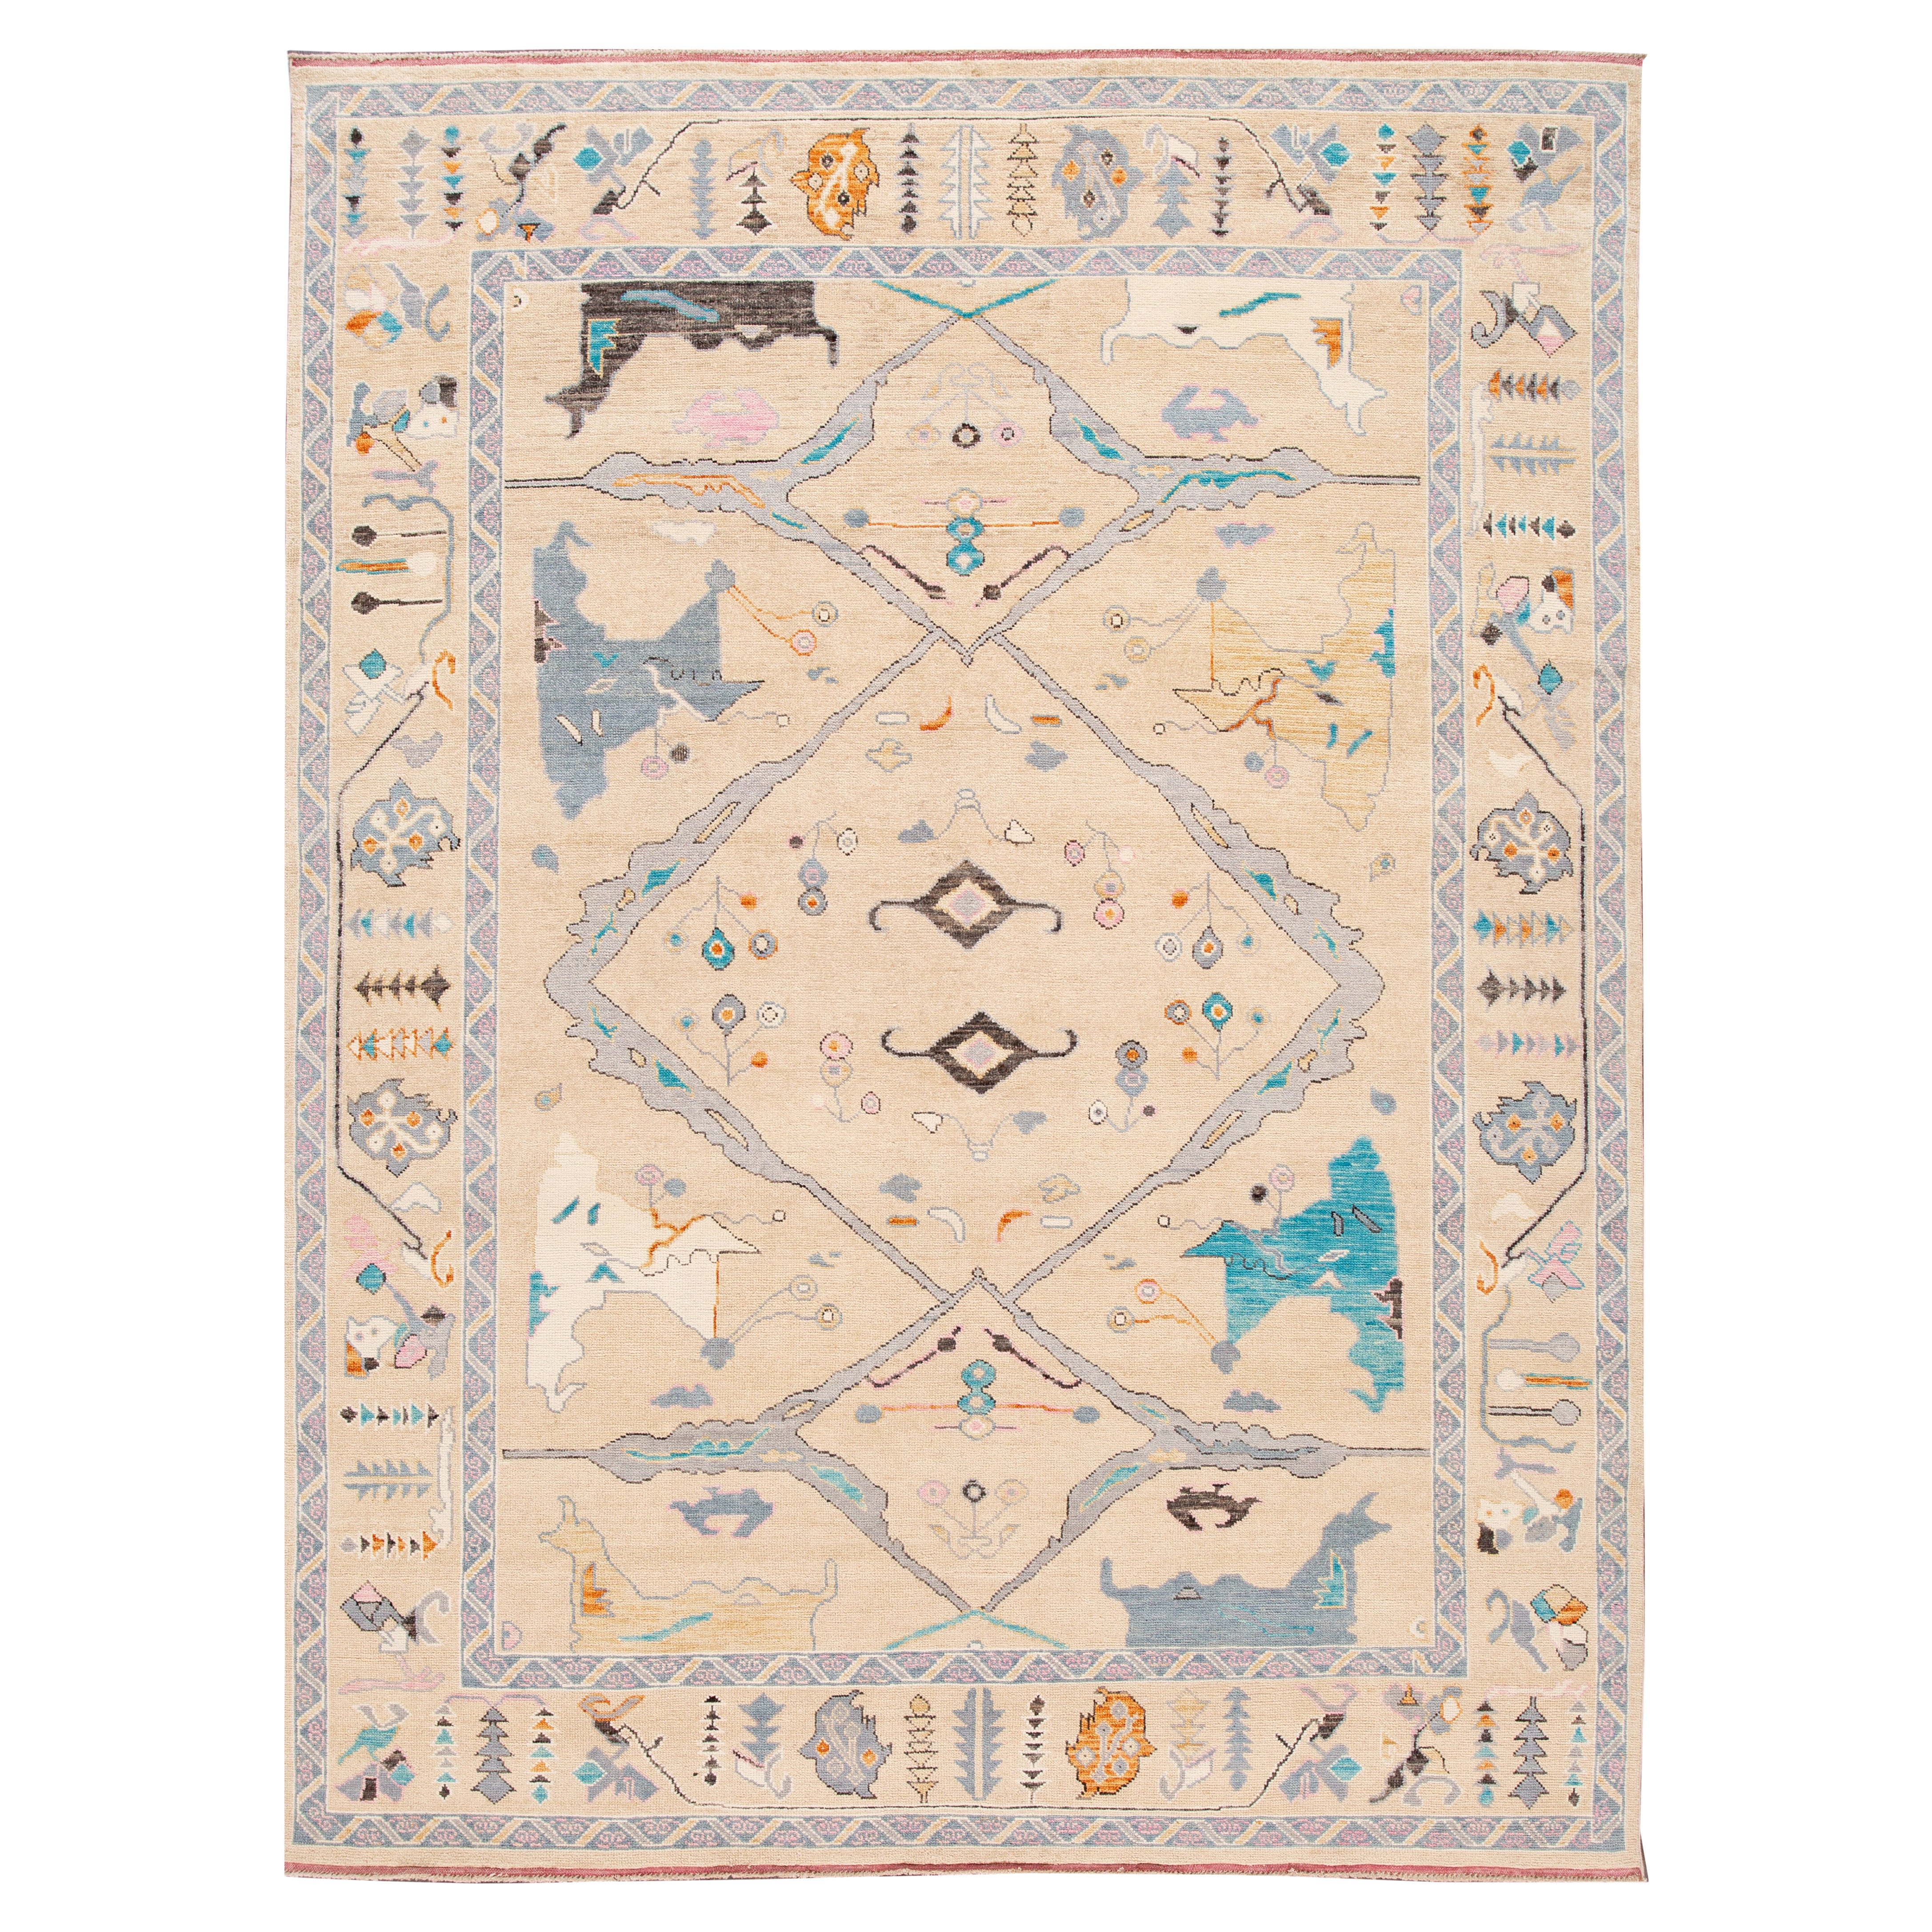 Contemporary Turkish Oushak Style Wool Rug In Beige With Artwork Pattern